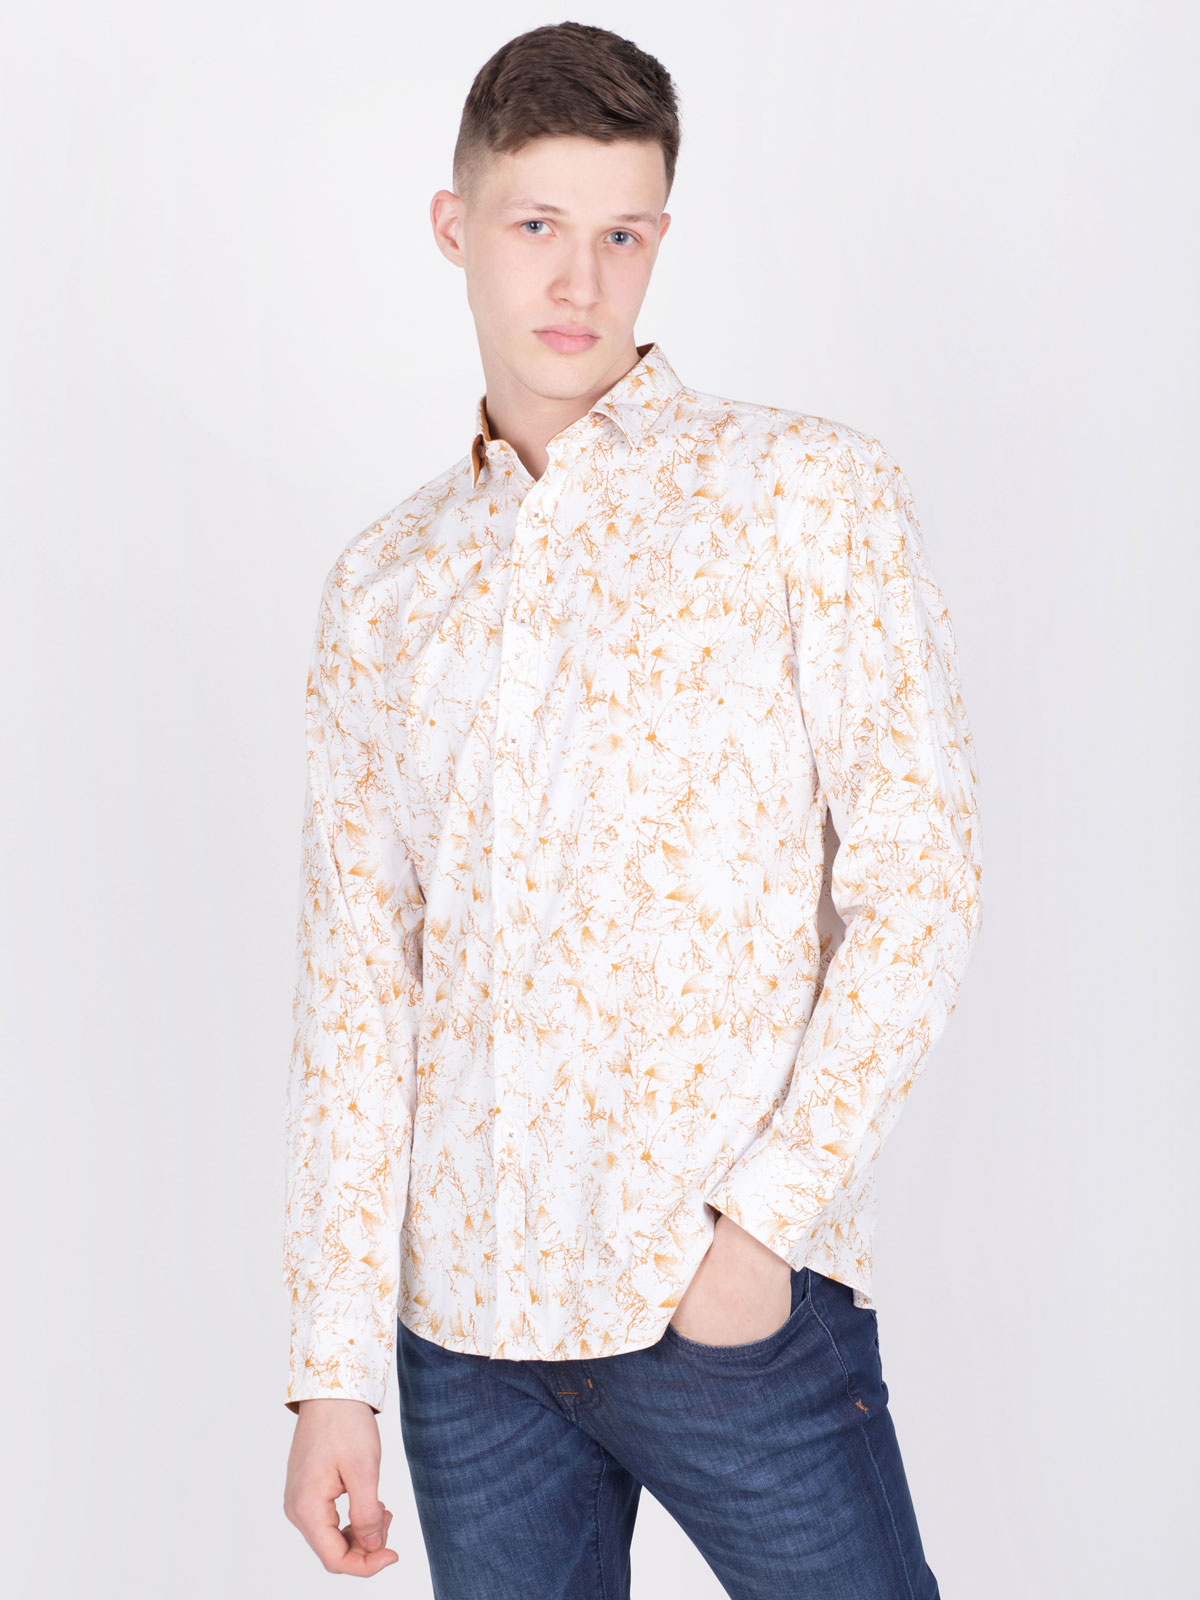 Mens white shirt with floral print - 21468 € 12.37 img4